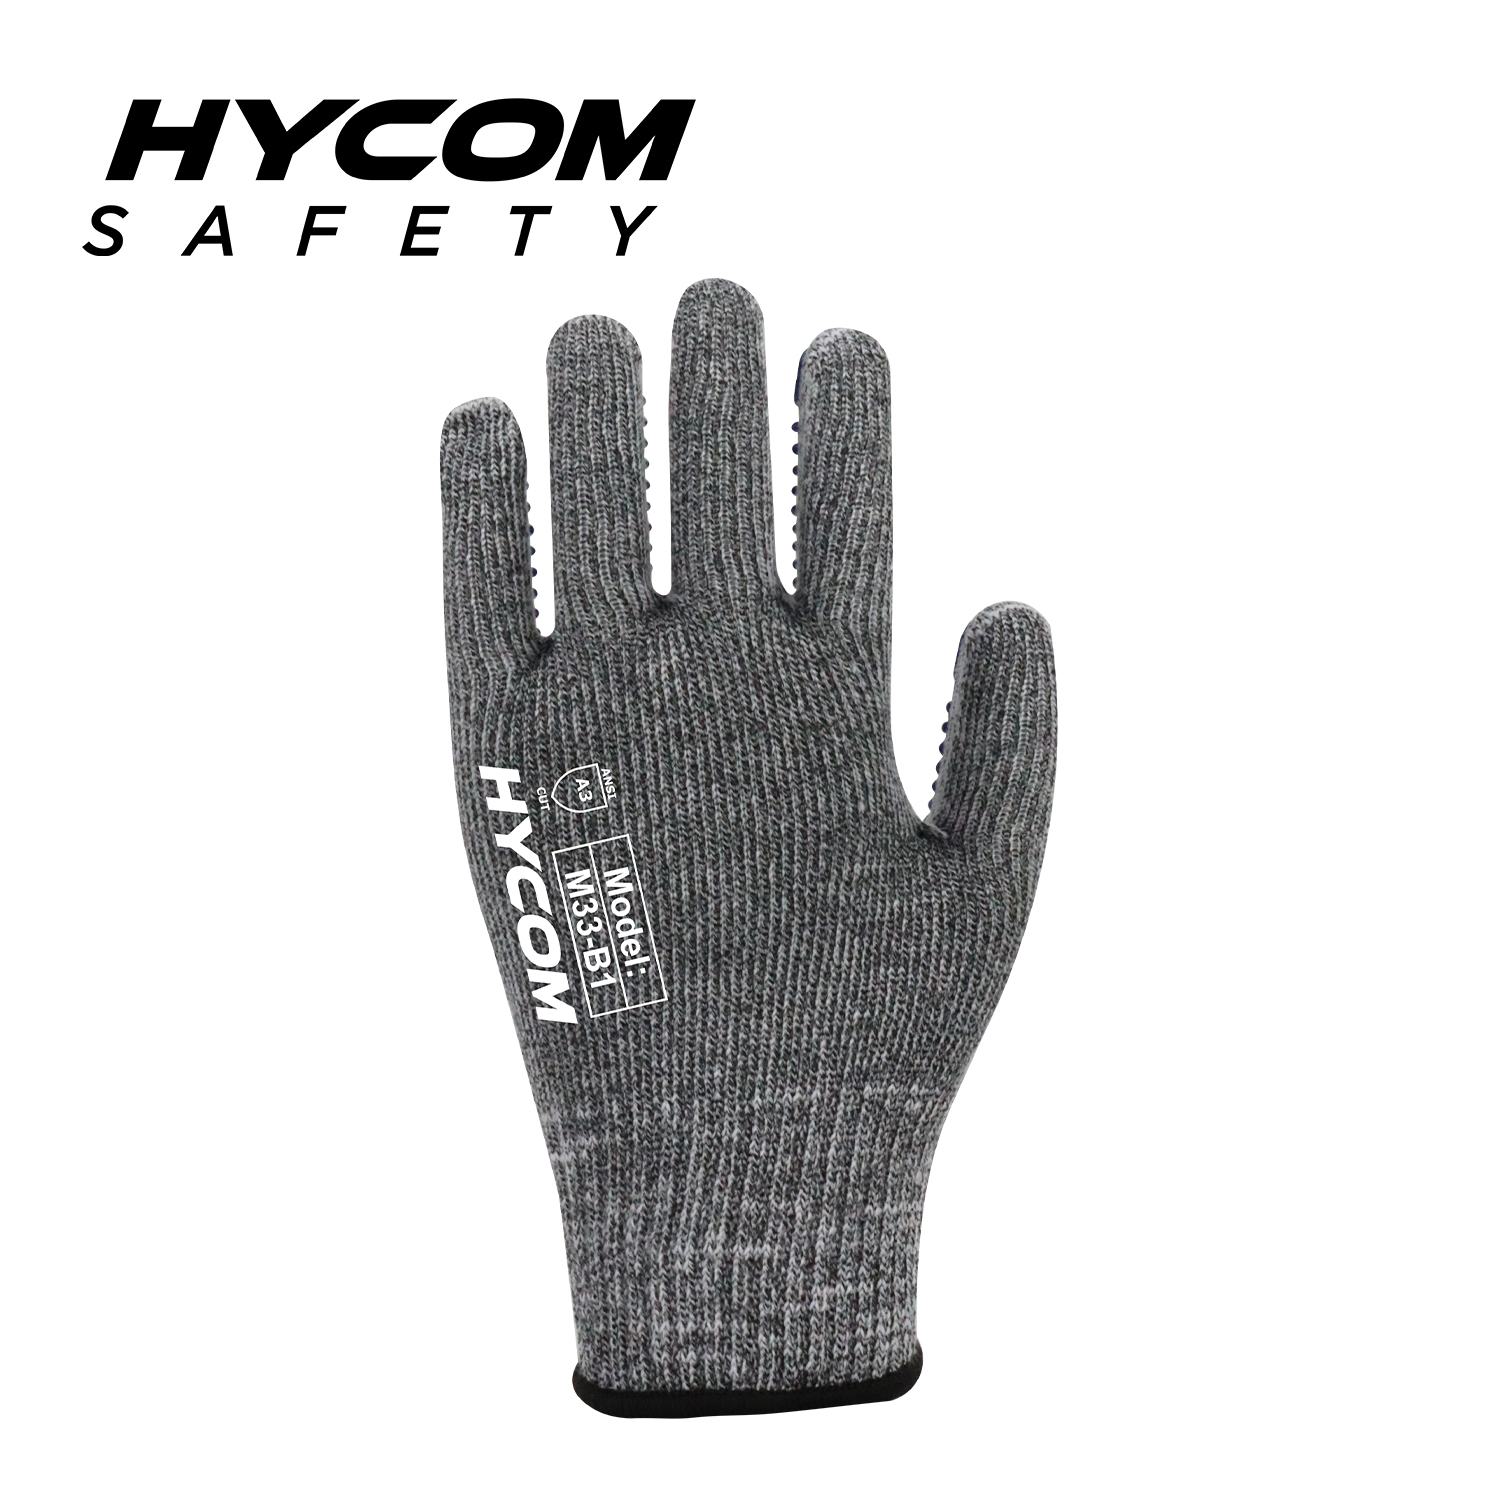 HYCOM 10G ANSI 3 cut resistant glove with palm PVC dots